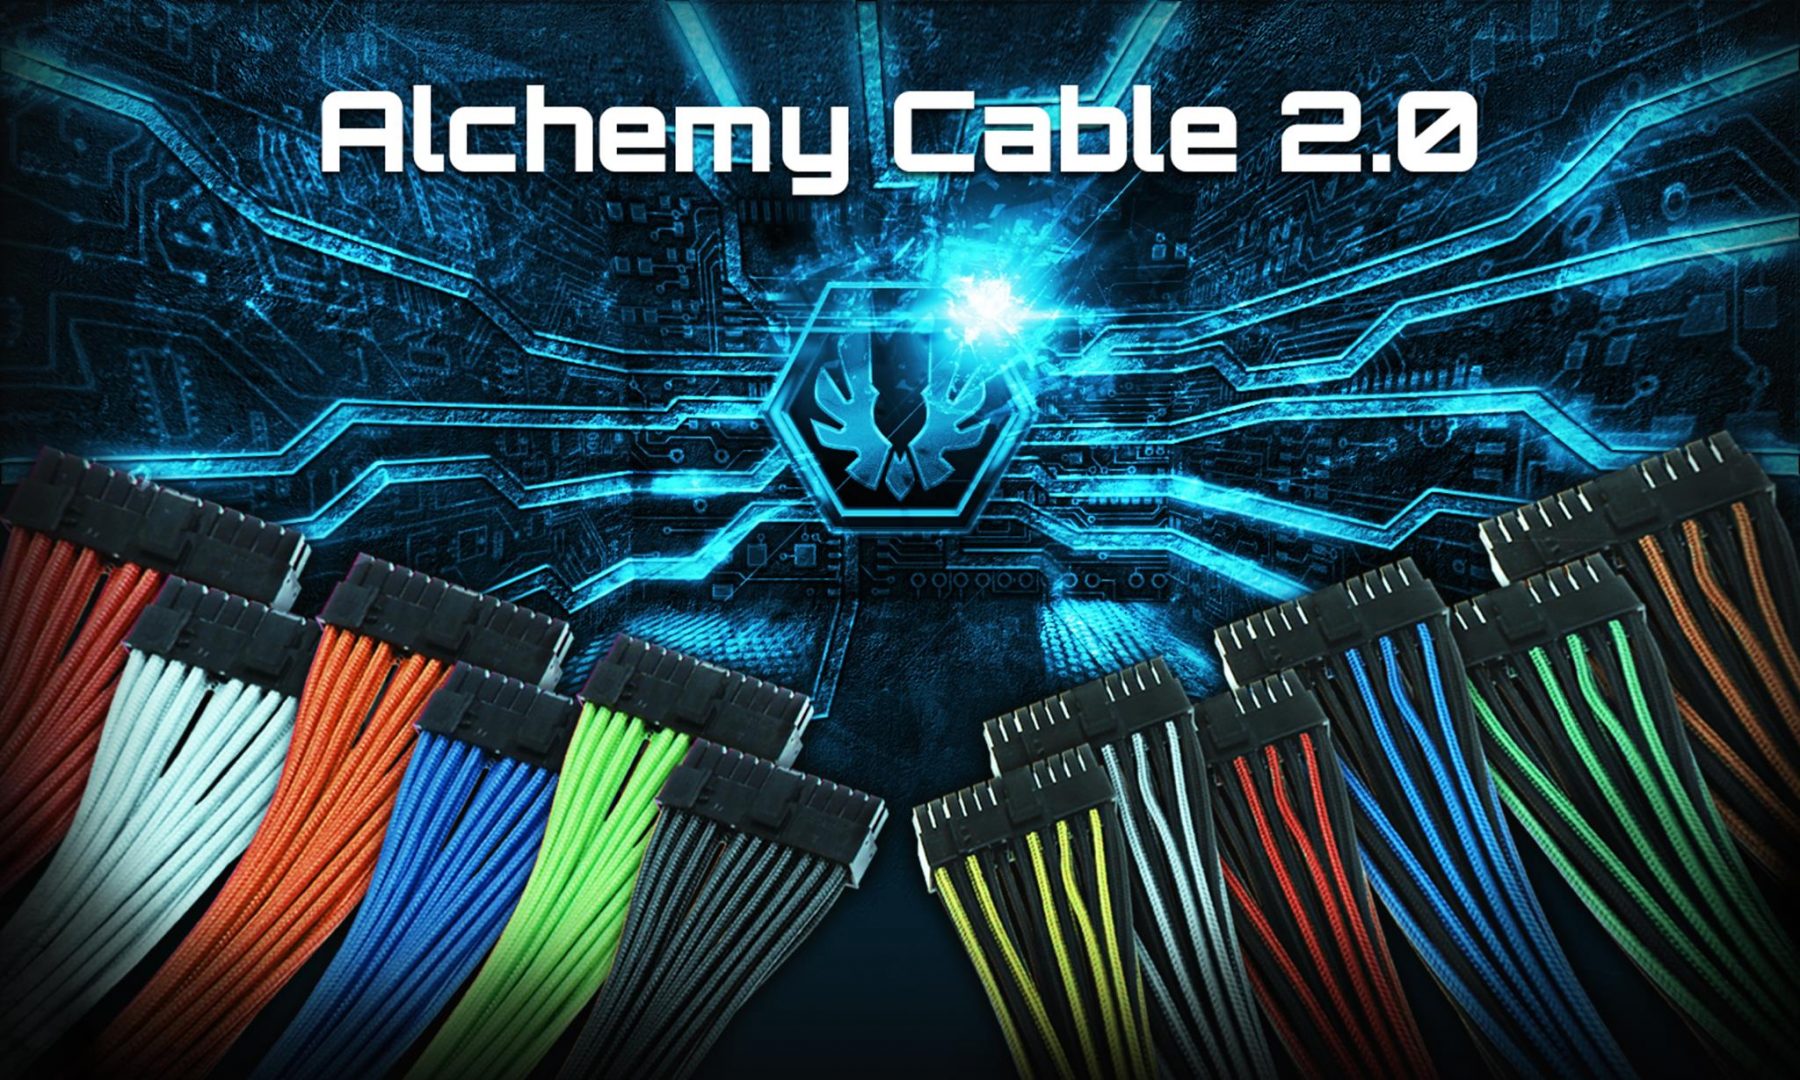 BitFenix Releases Alchemy Cable 2.0